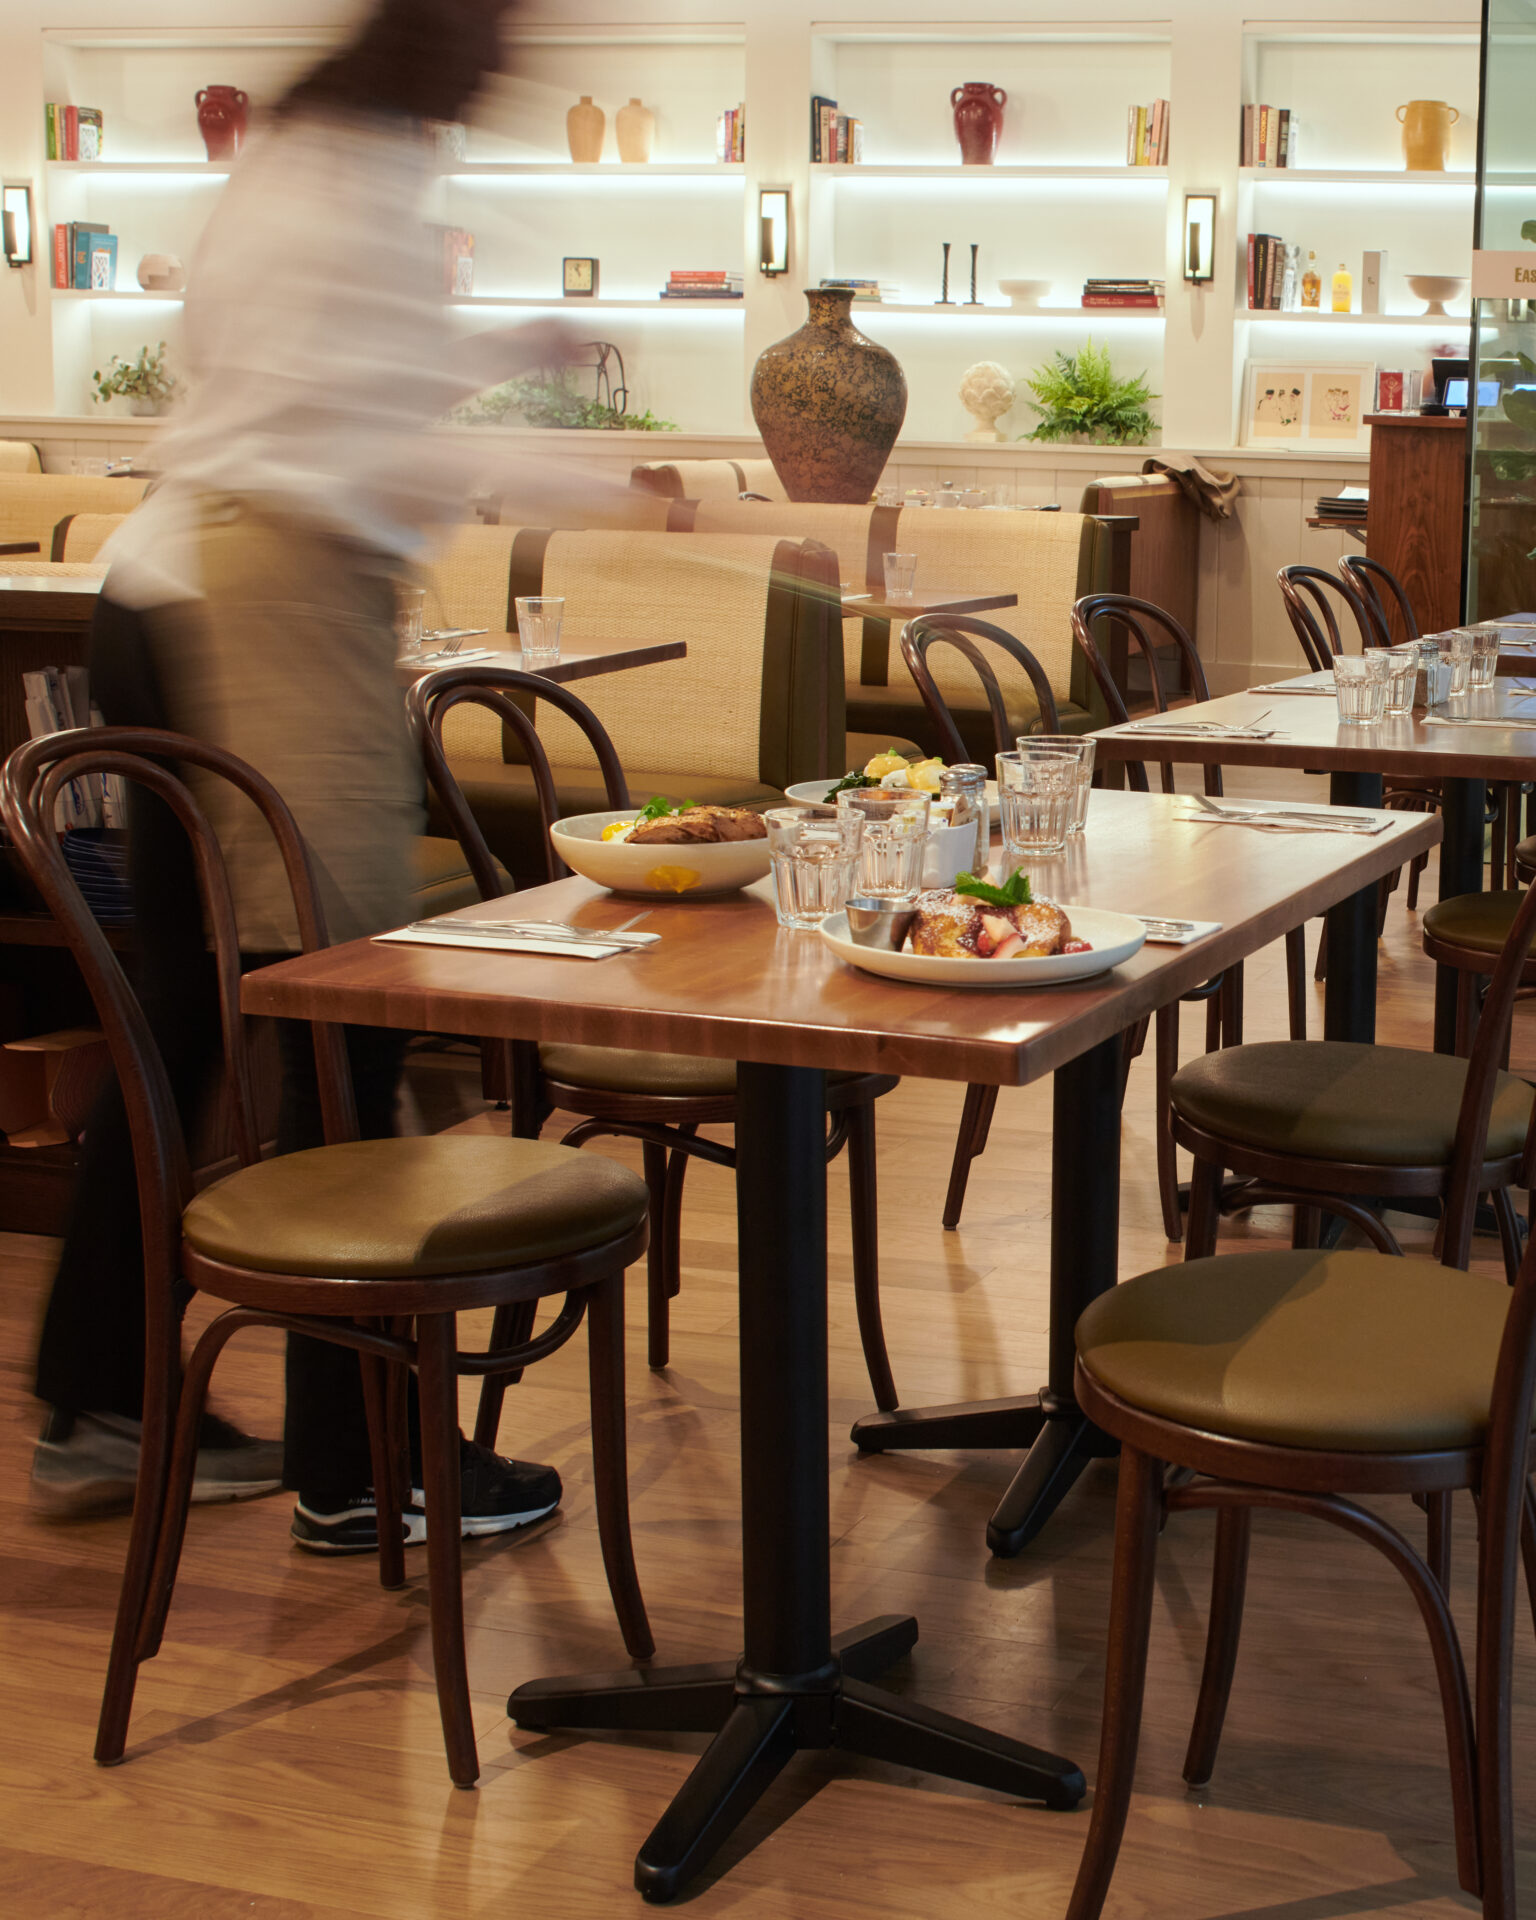 Friedmans restaurant in New York with NOROCK self-stabilizing table bases